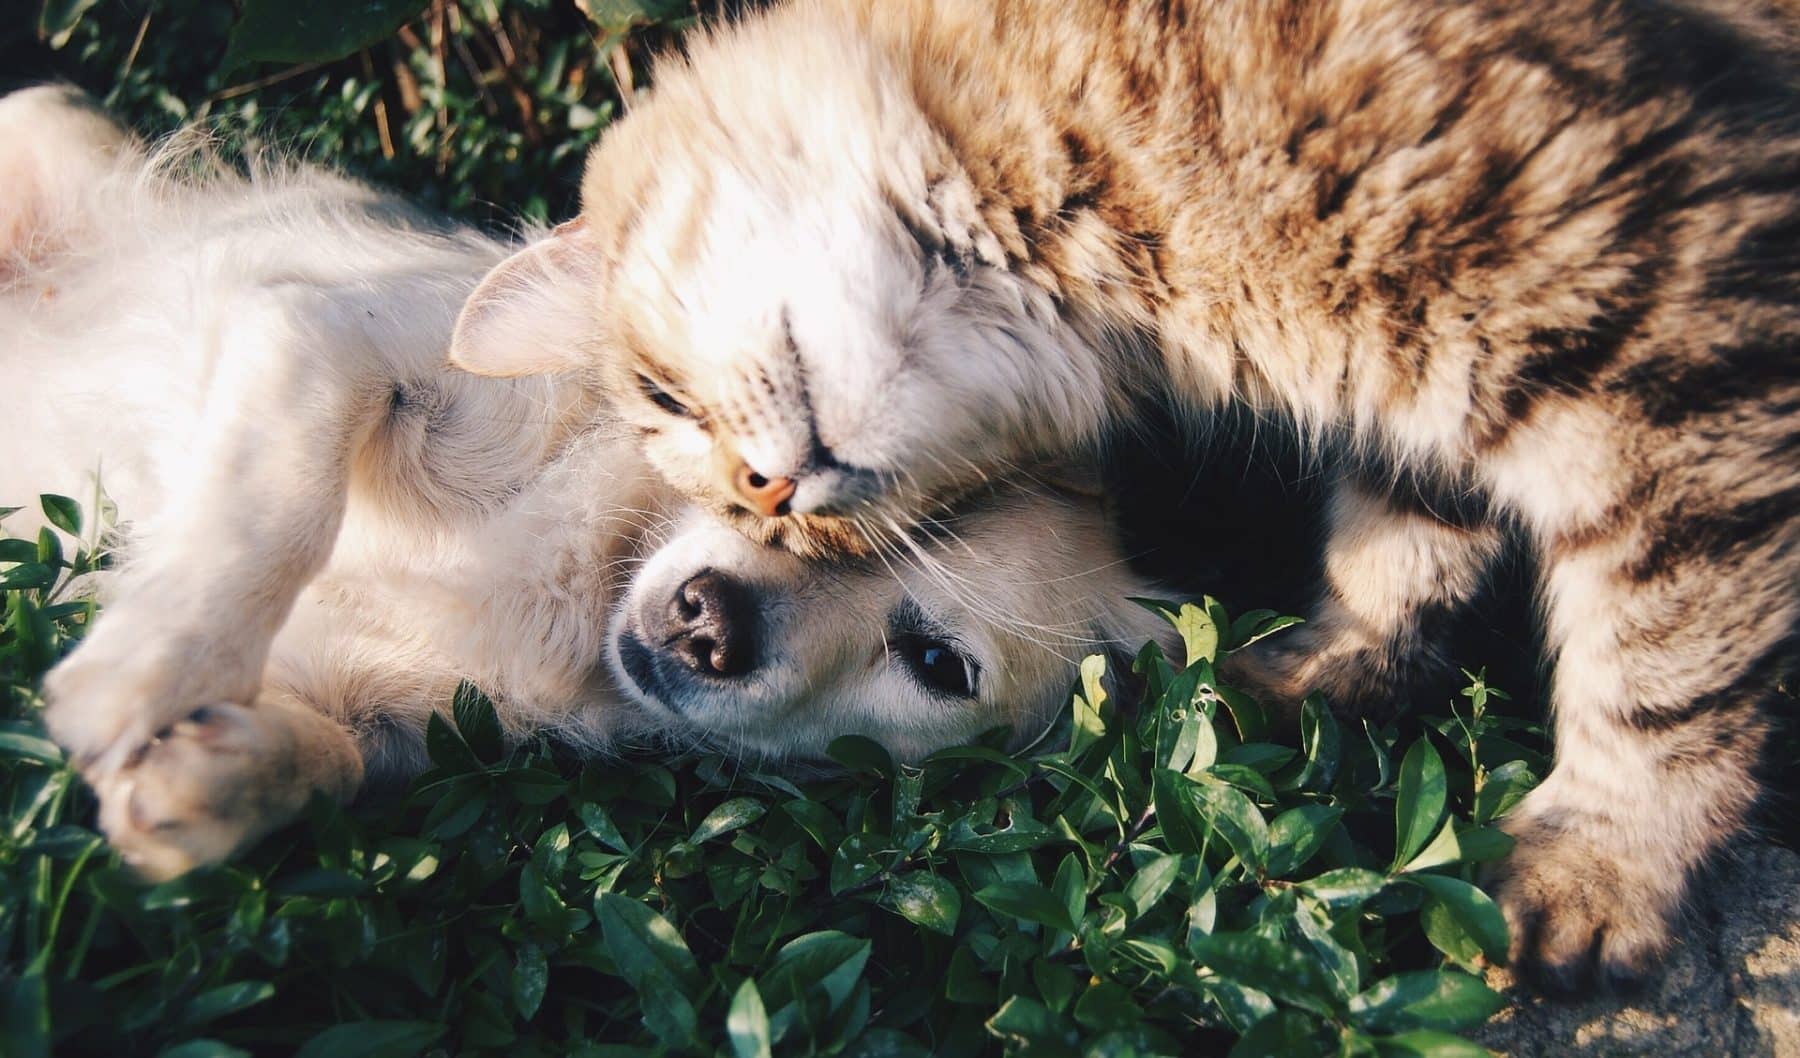 dogs breeds that get along with cats